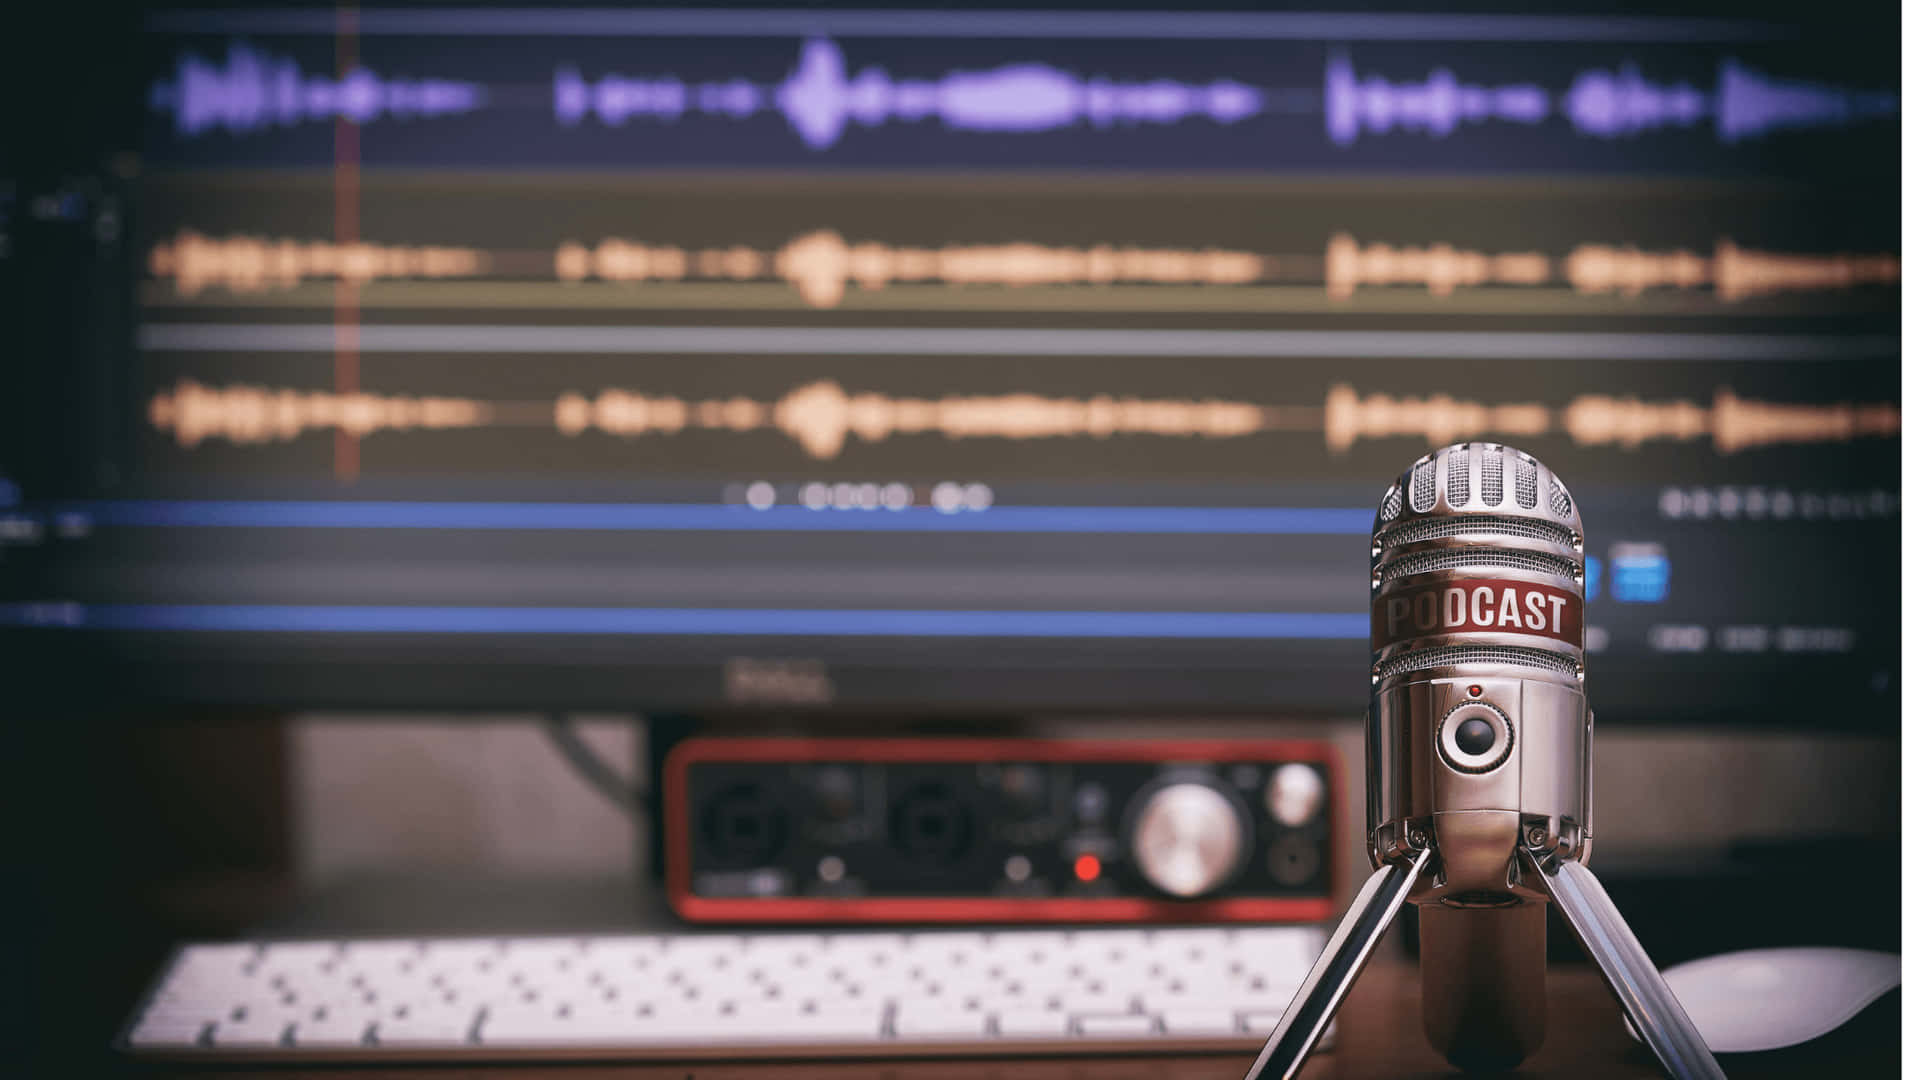 Landscape Podcast Microphone Monitor Background